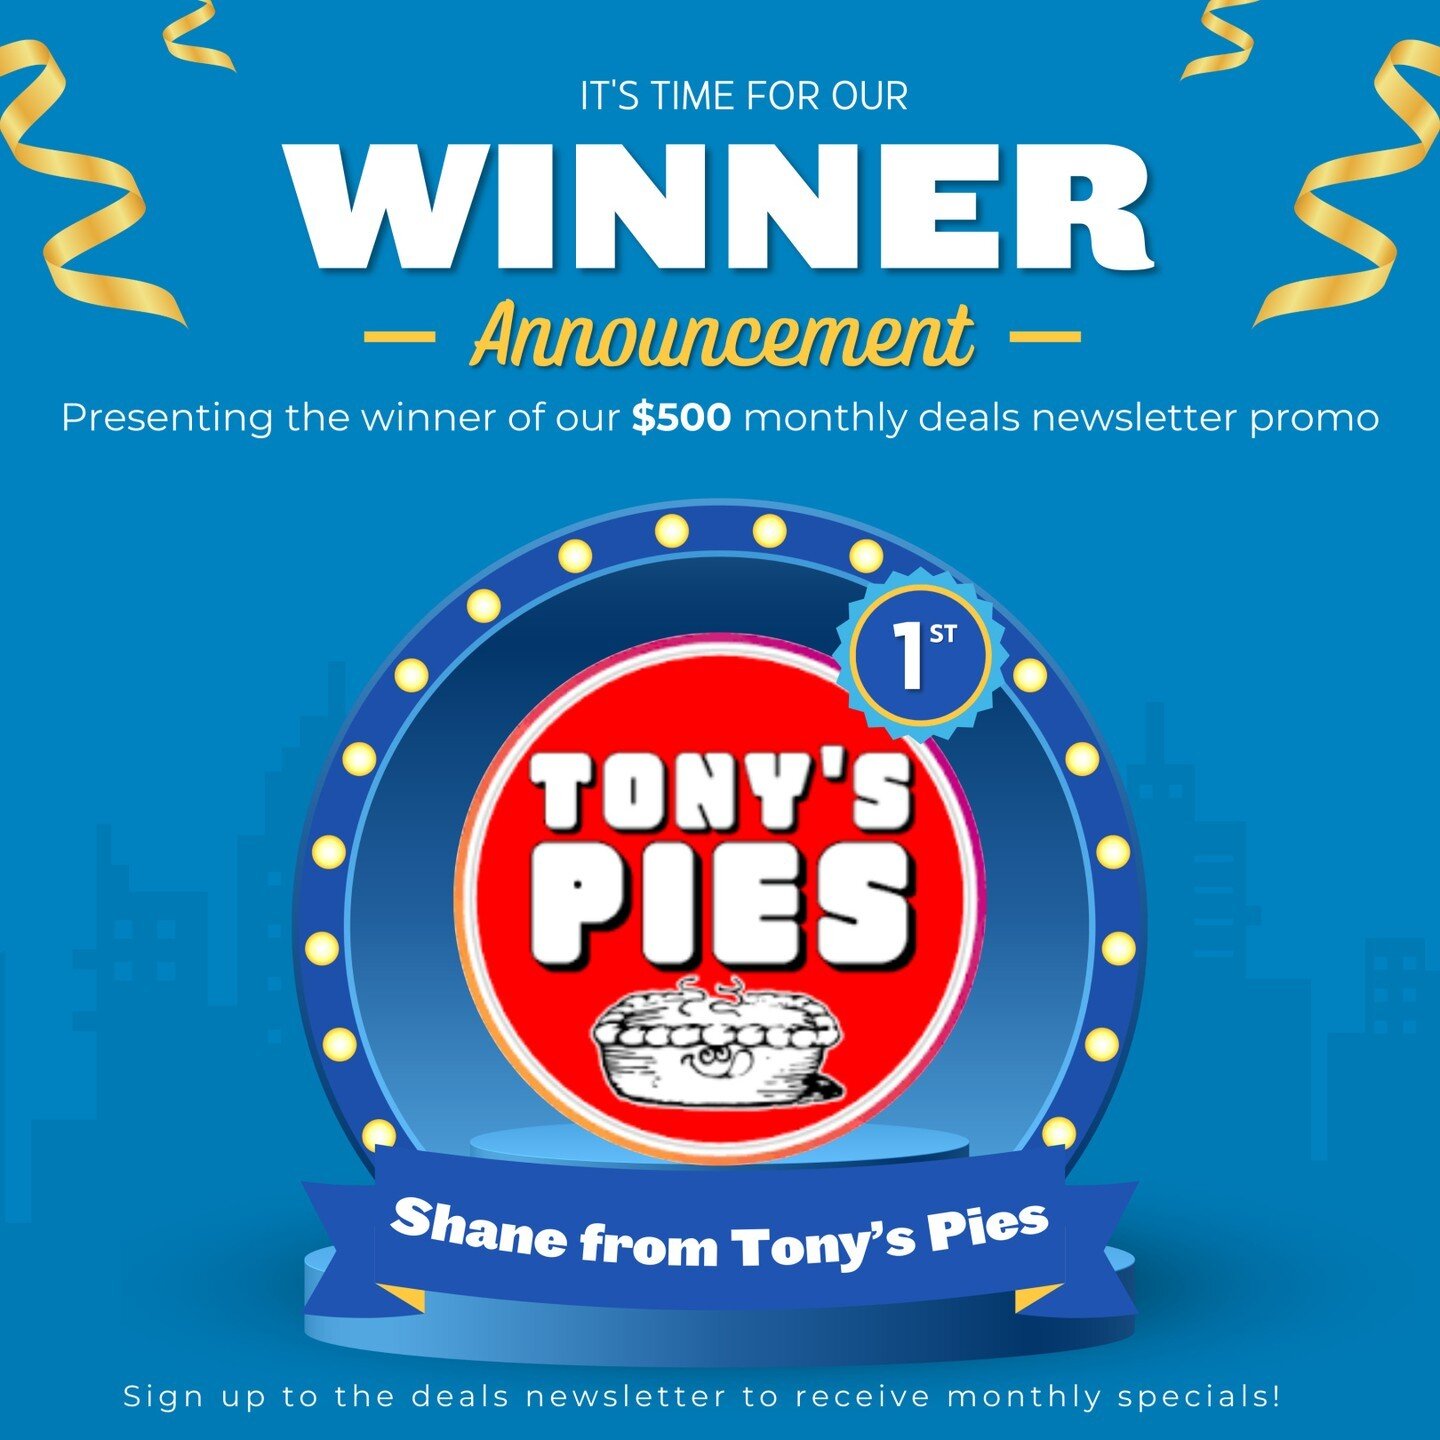 A big congratulations to Shane from @tonyspies on winning $500 in our monthly deals newsletter promo! 

Unfortunately the promo has ended, but the good news is you can still sign up to receive monthly specials on your fats and oils ↪ link in bio

#mo